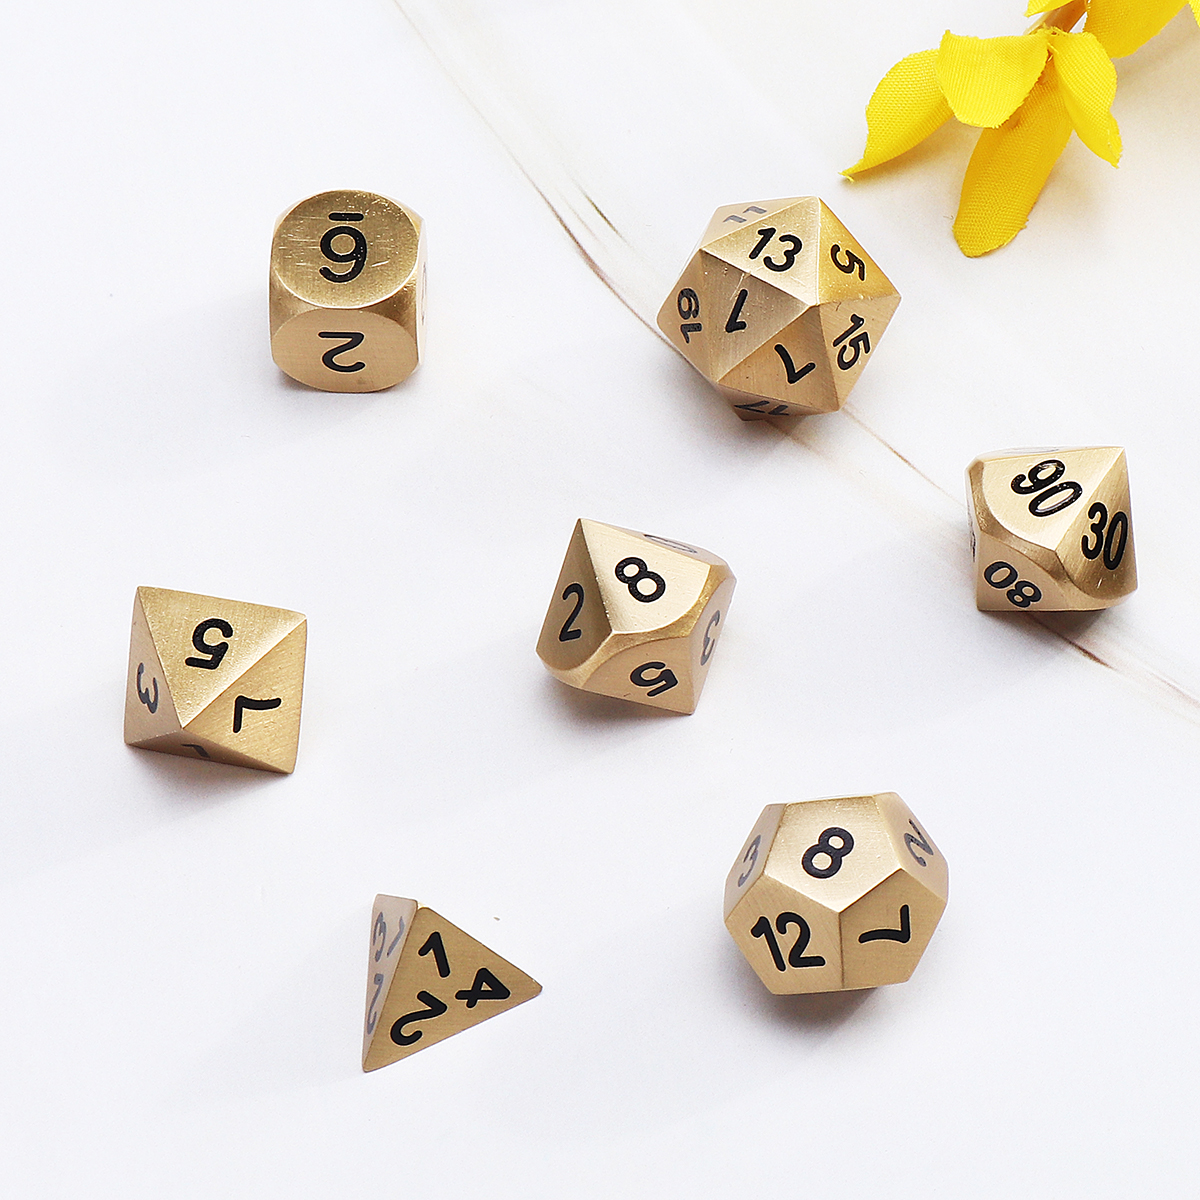 Pure-Copper-Polyhedral-Dices-Set-Metal-Role-Playing-Game-Dice-Gadget-for-Dungeons-Dragon-Games-Gift-1608120-8